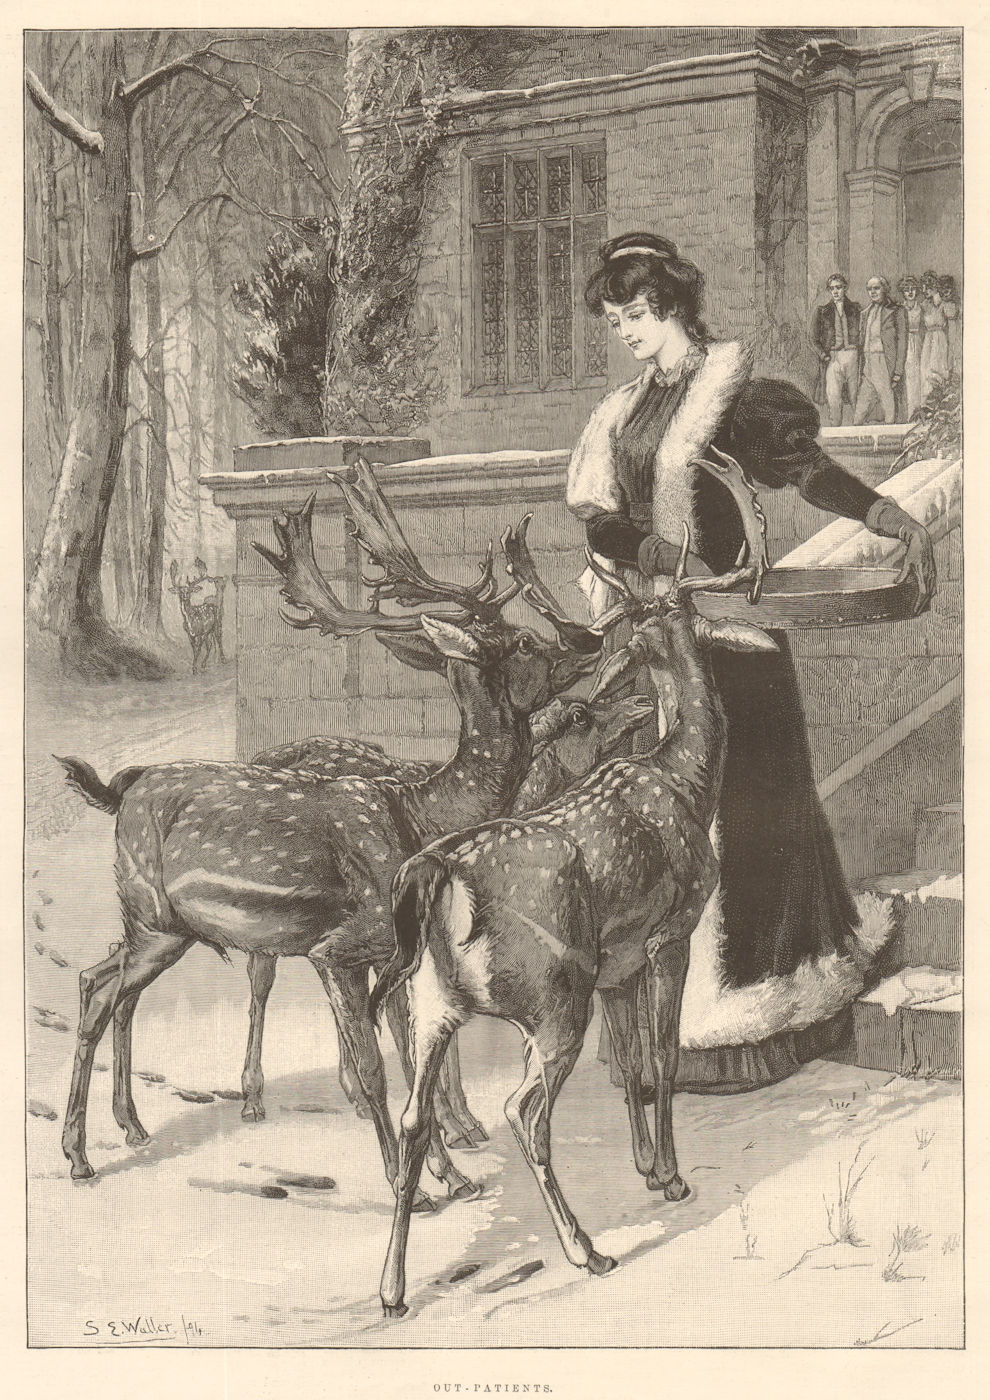 Associate Product "Out-patients". Deer being fed by a lady 1895 antique ILN full page print